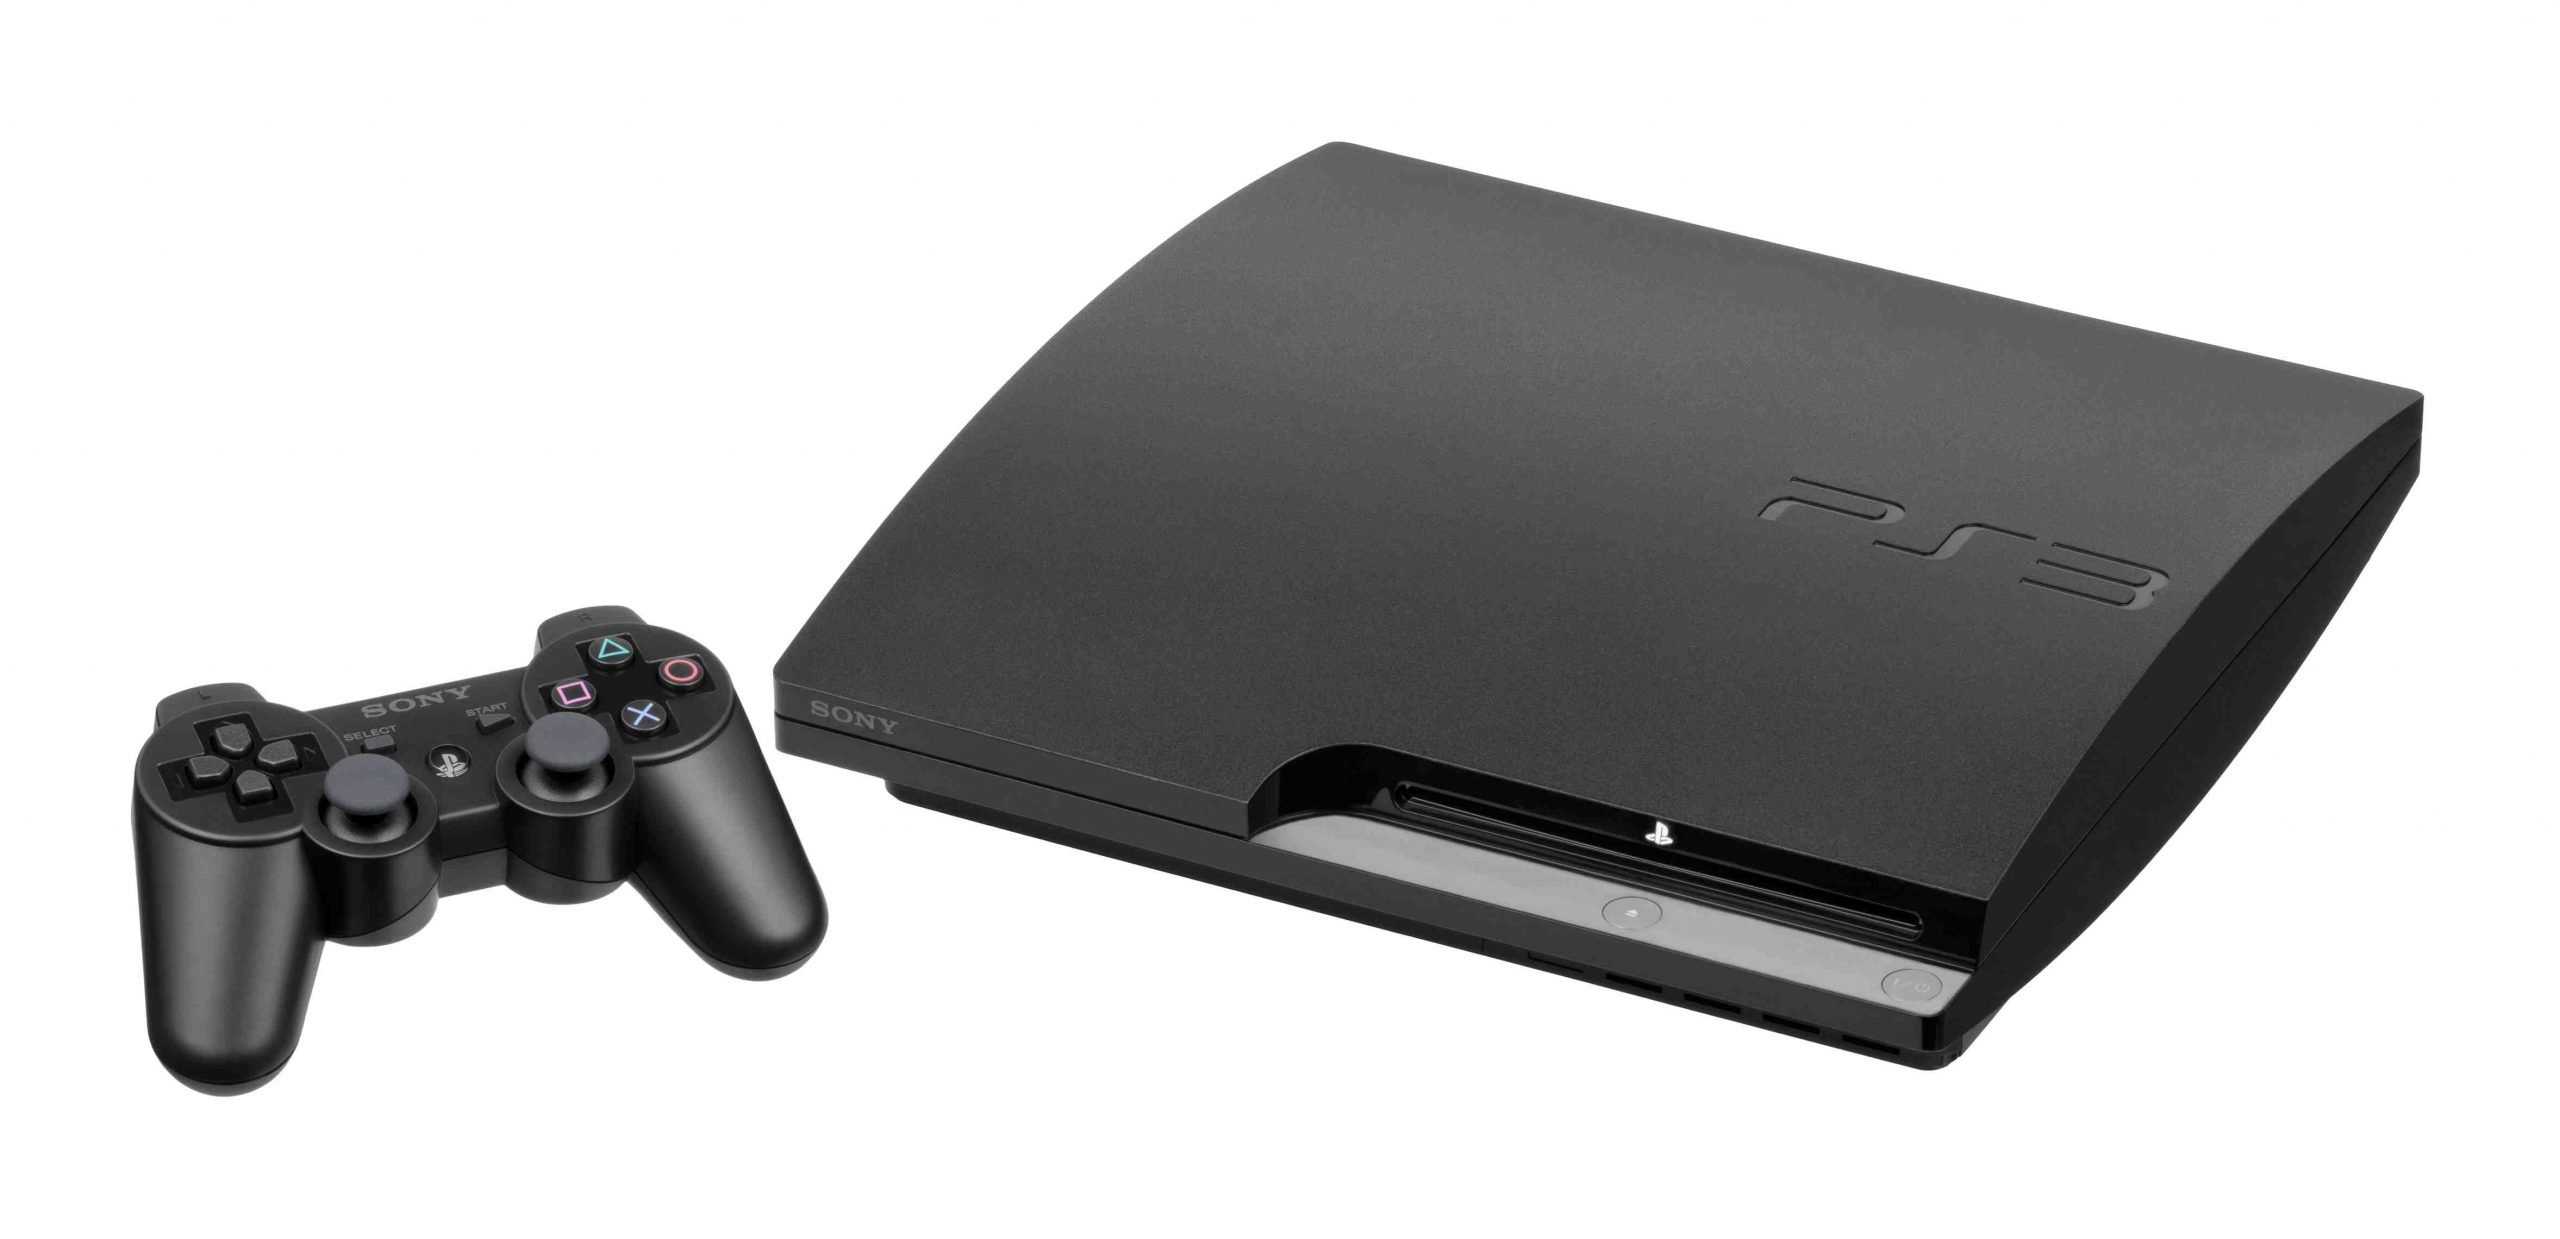 Is PlayStation 3 Compatible With PS2?